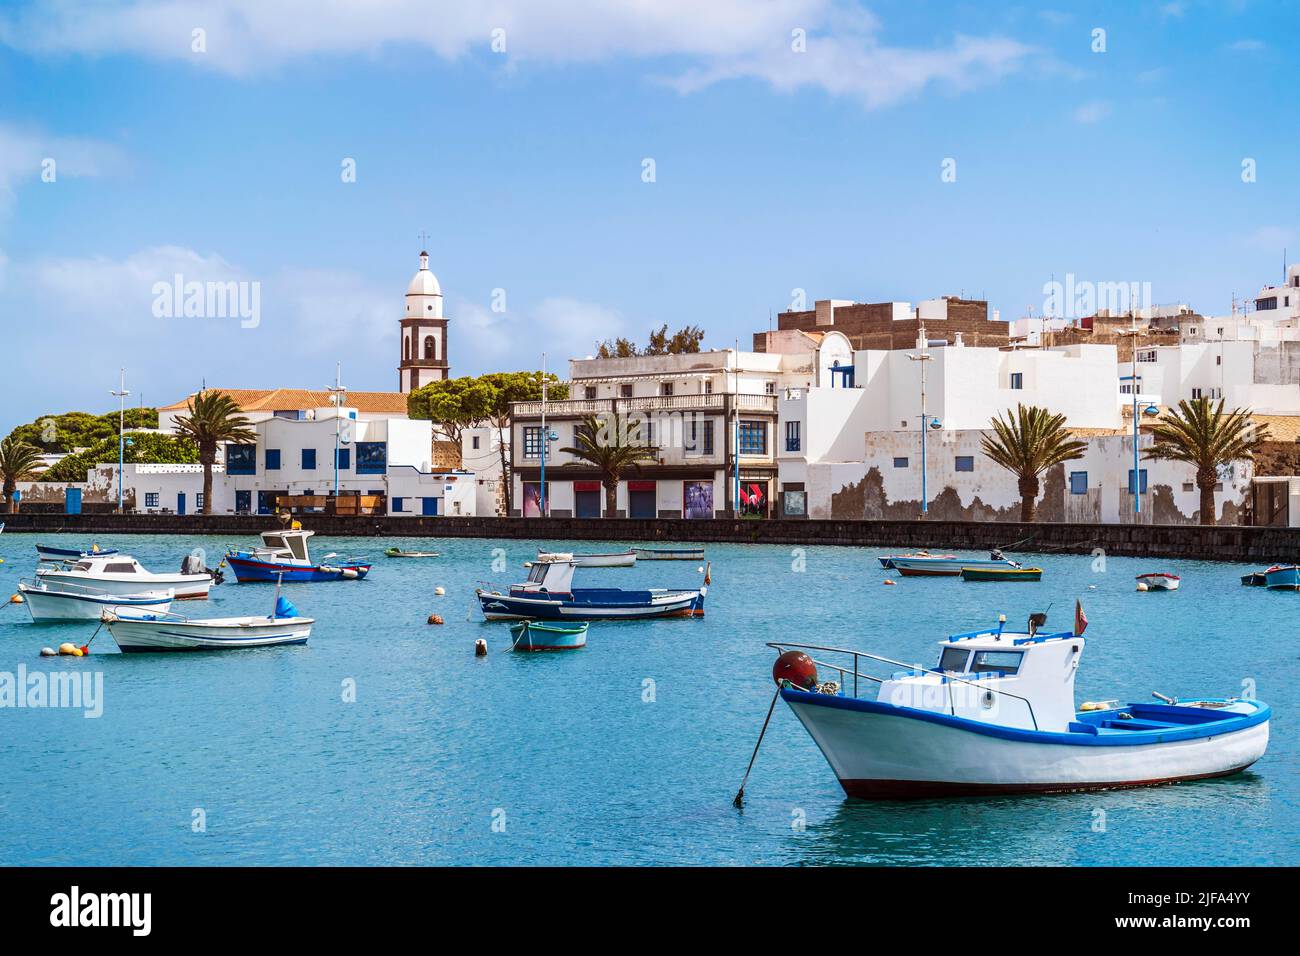 Beautiful quay with historic architecture and boats on blue water in Arrecife, Lanzarote, Canary Islands, Spain Stock Photo